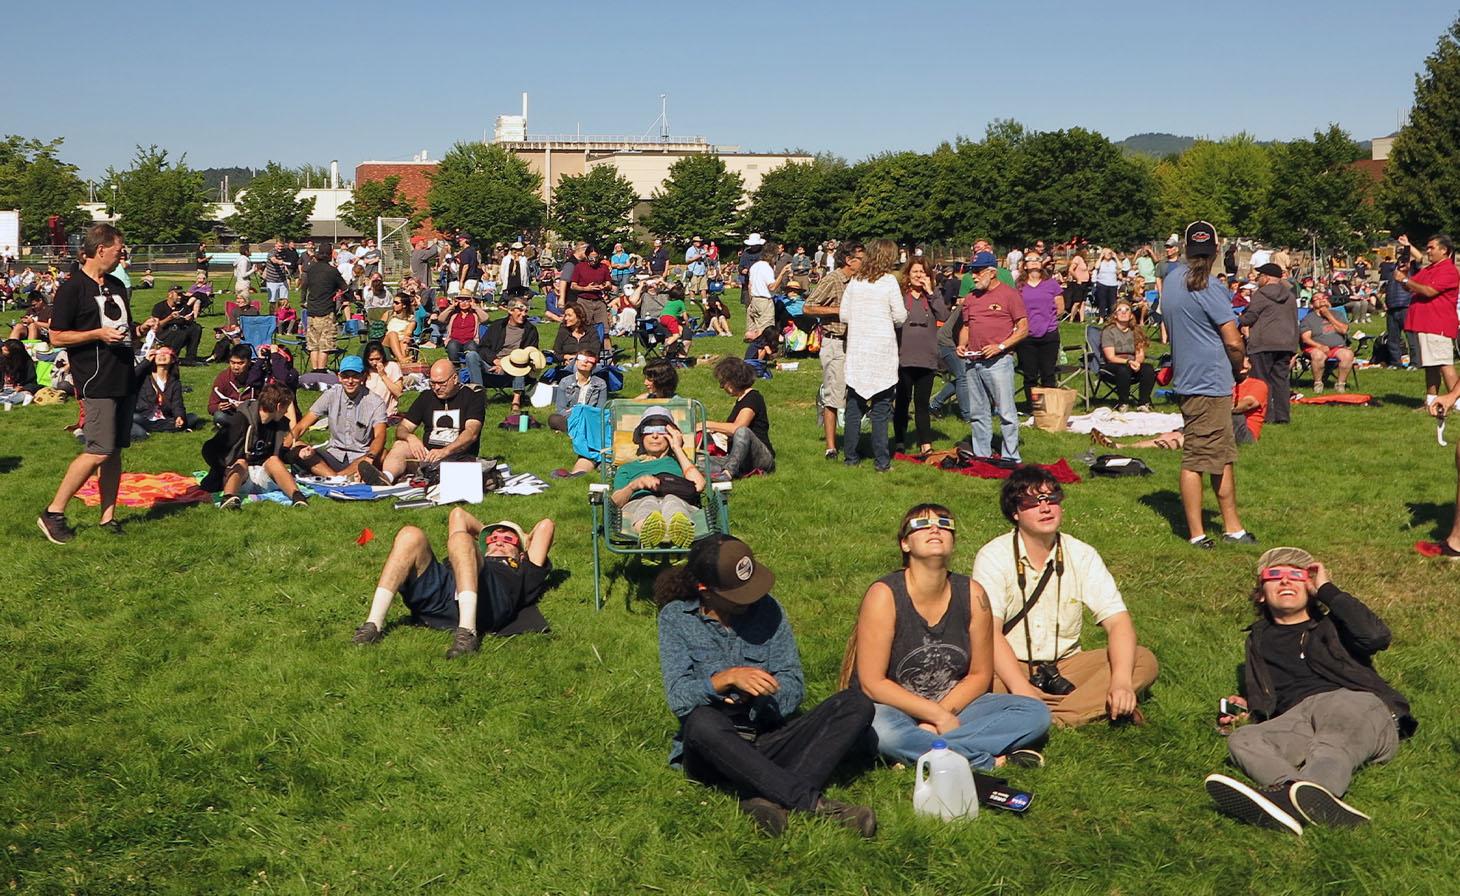 People gathered in a field for the 2017 eclipse.